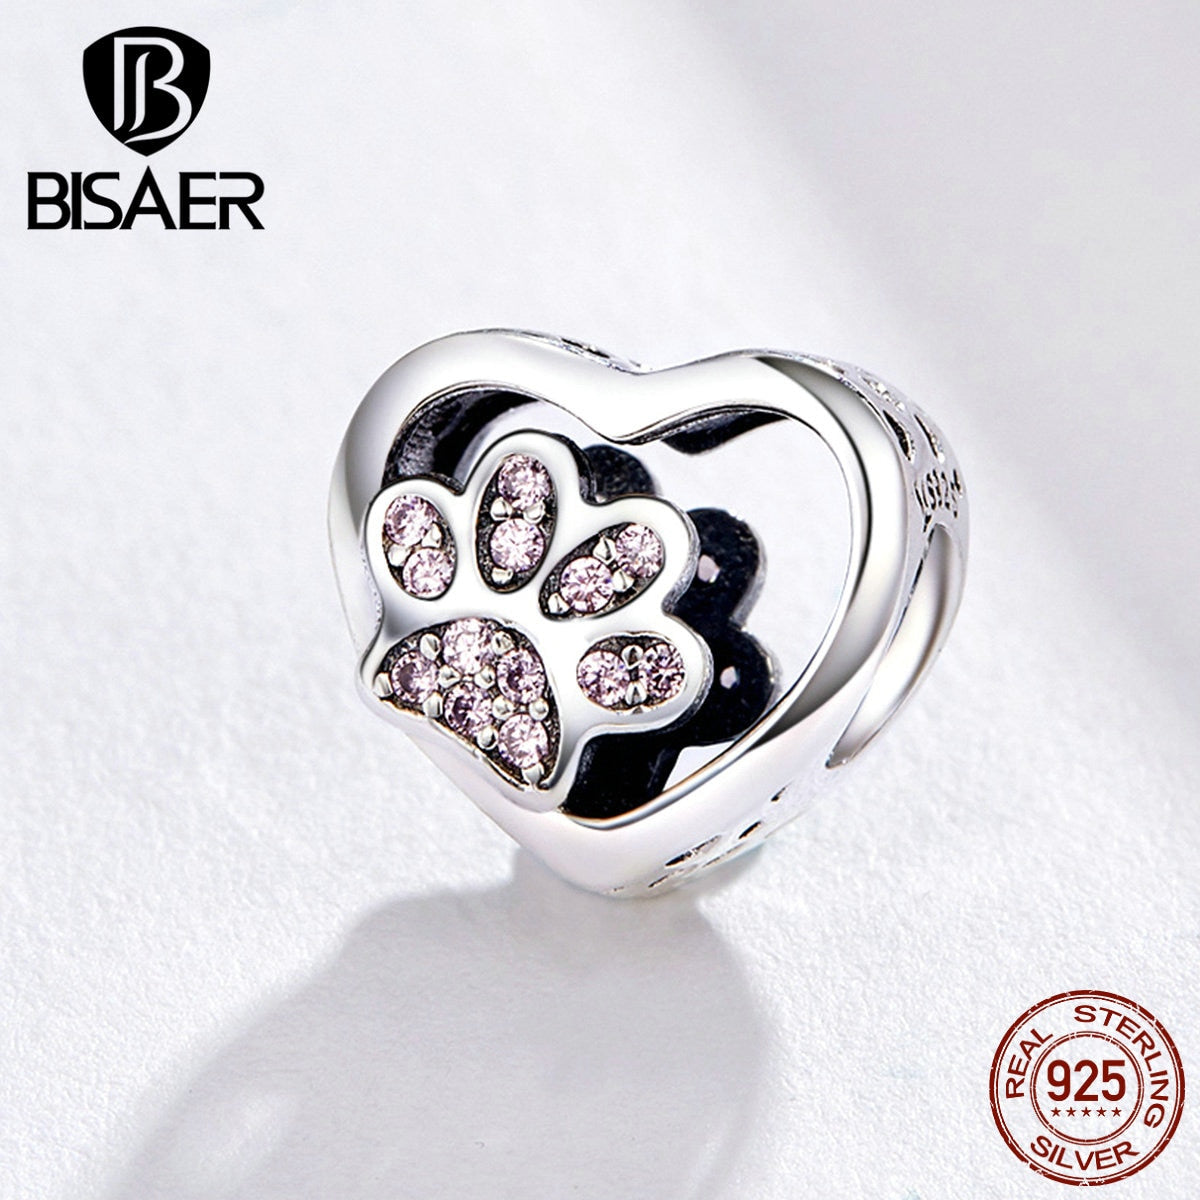 BISAER Hot Sale 925 Sterling Silver Heart Star Princess Crown Bowknot Dream Catcher Charms Beads fit Silver 925 Jewelry Making